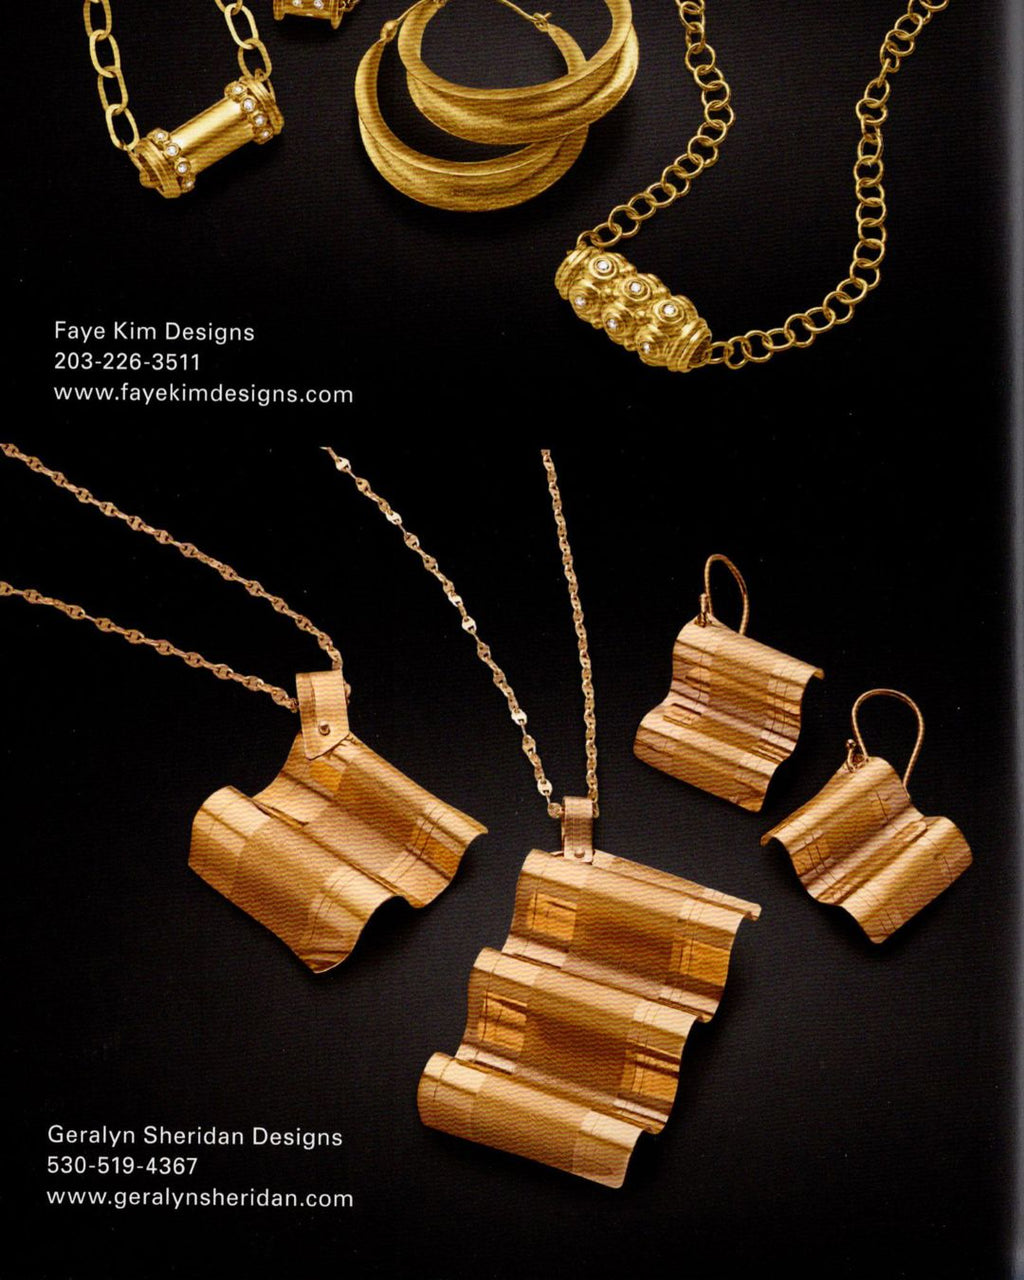 Geralyn Sheridan Designs Featuring WGC Power of Gold Book 